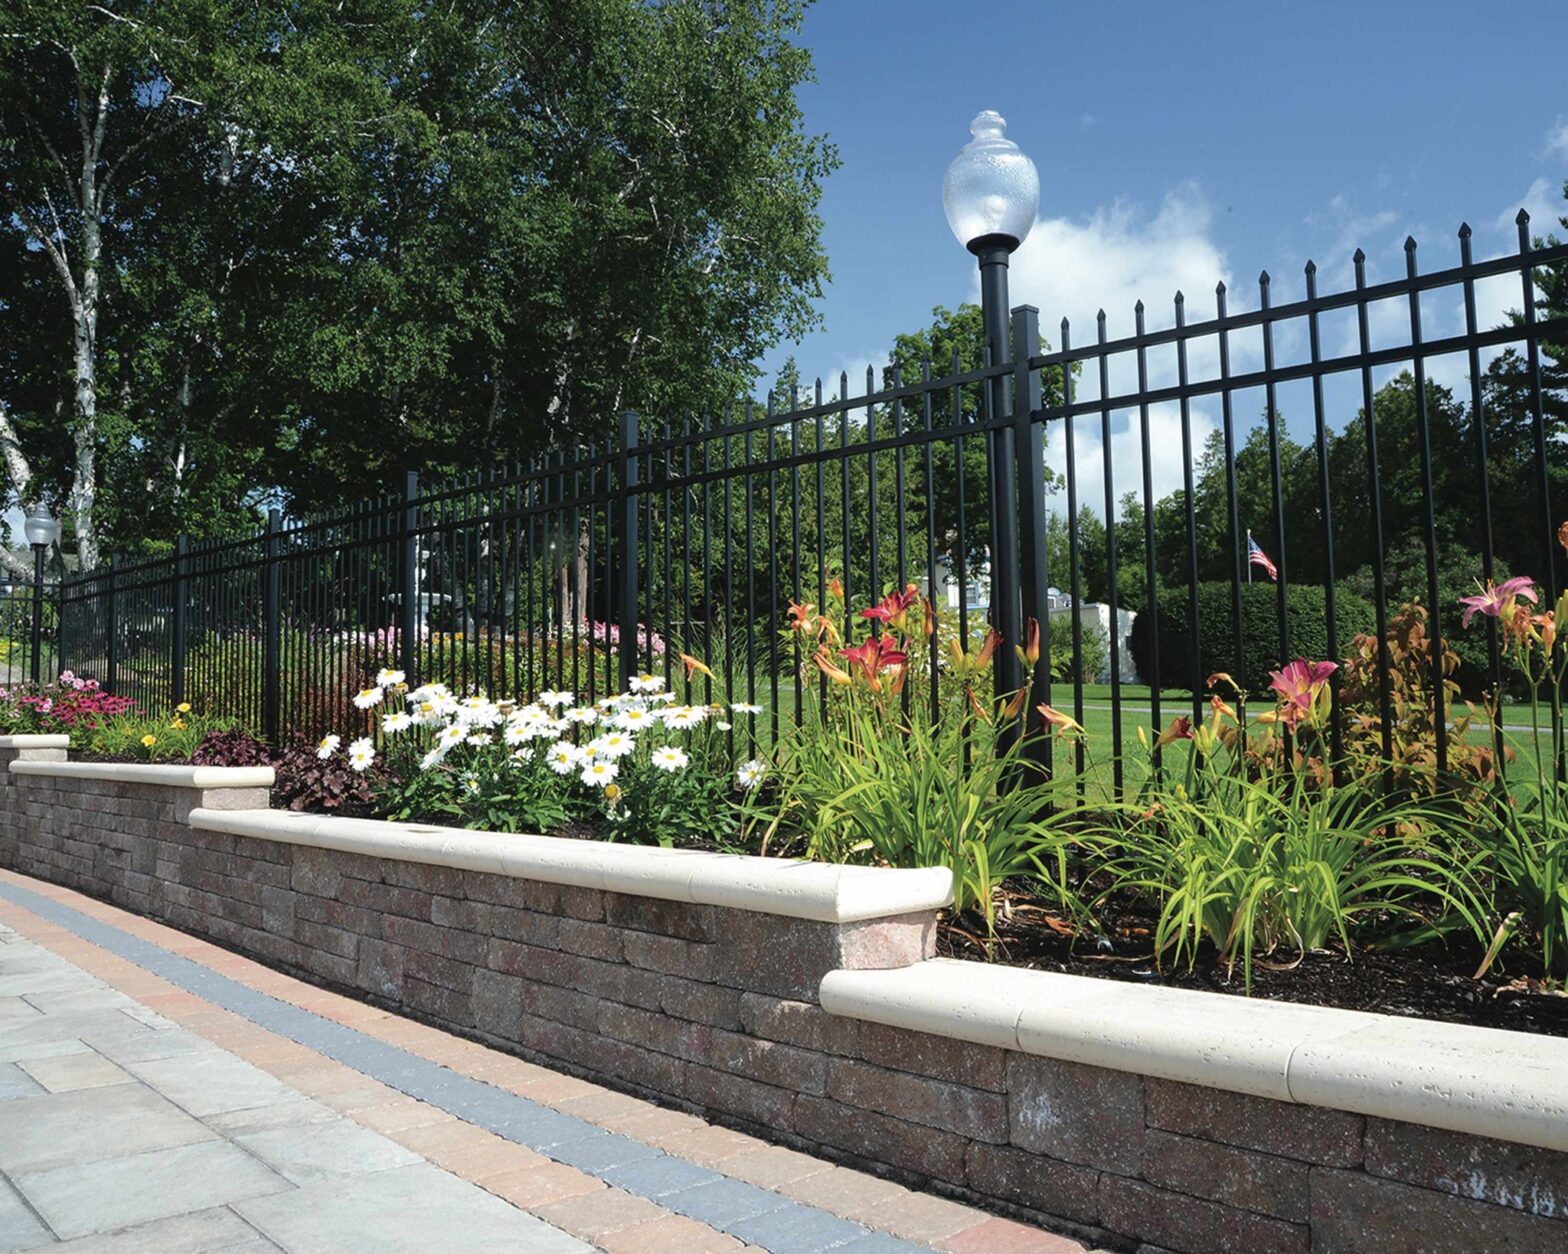 Photo of Massachusetts commercial fencing